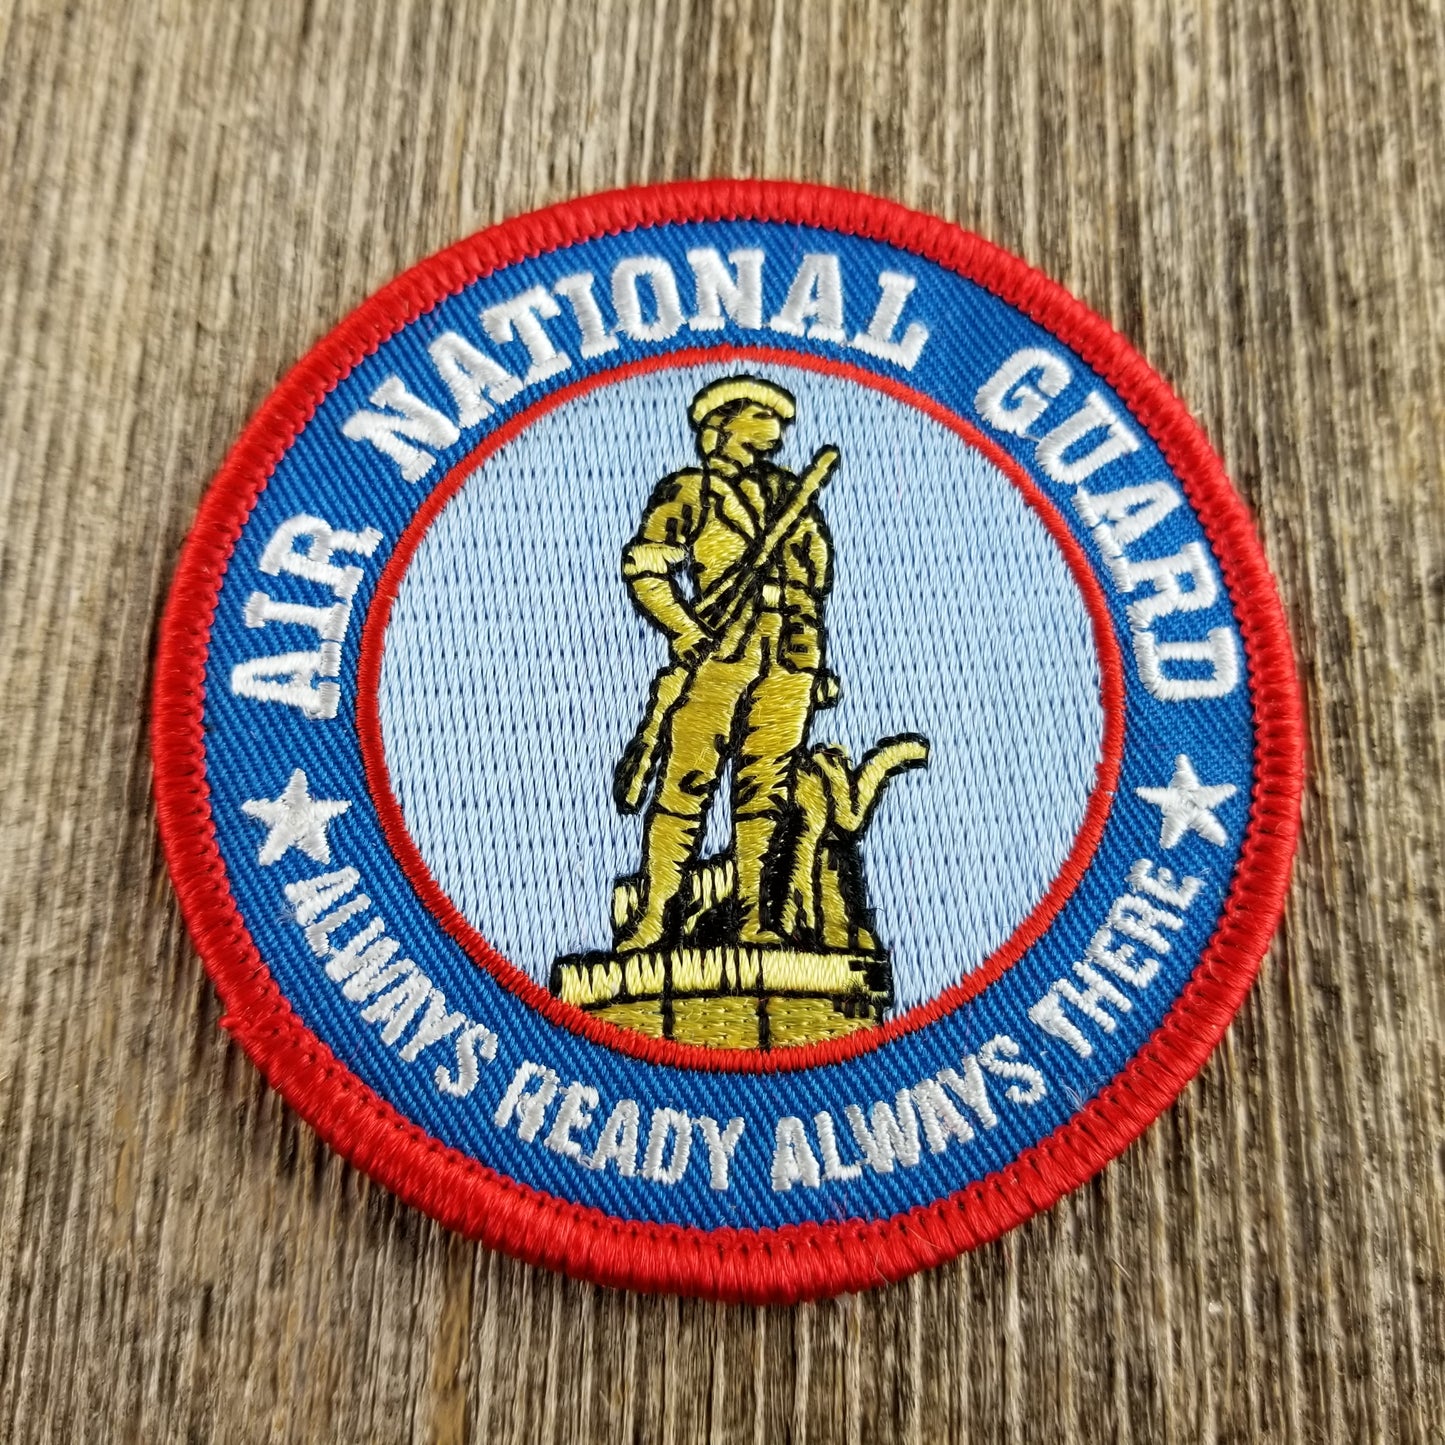 Air National Guard Patch - Always Ready Always There Iron On Souvenir Badge Emblem